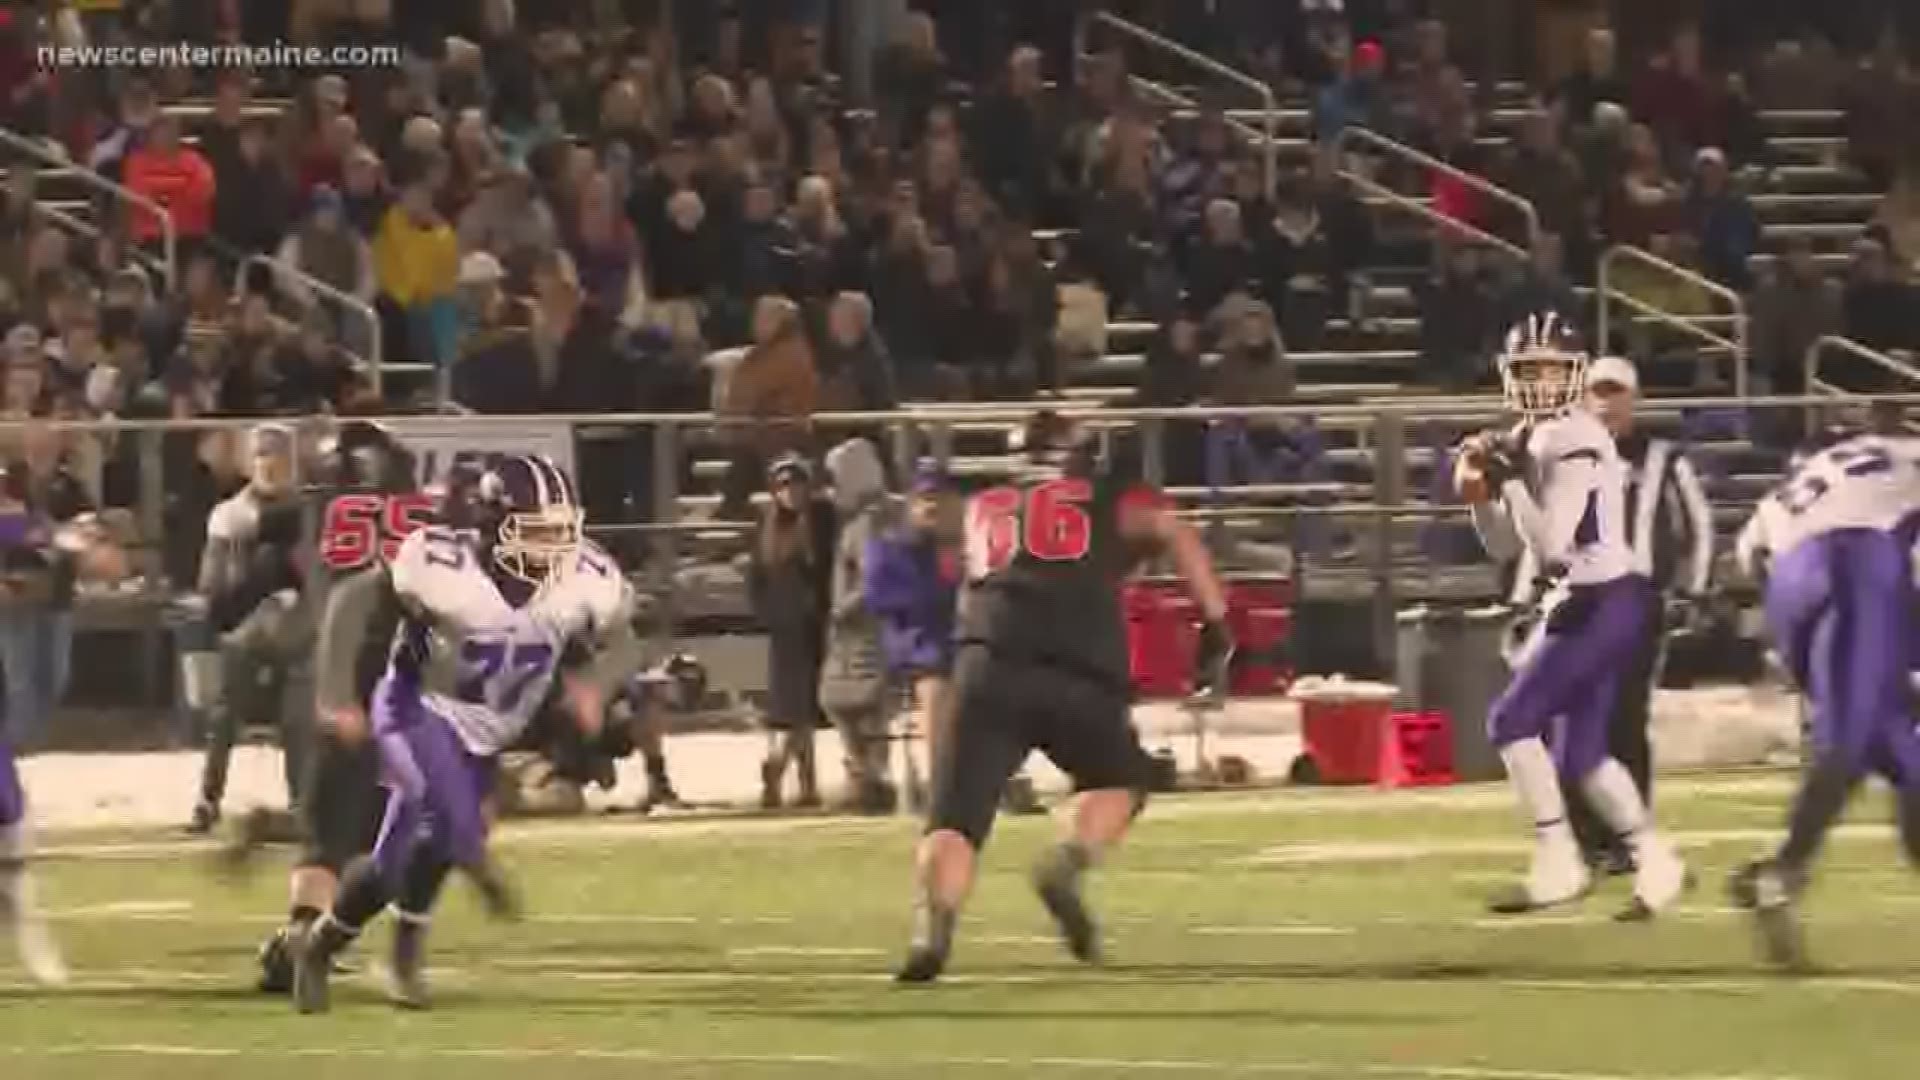 Highlights from Class B Brunswick and Marshwood, and Class D Wells and Foxcroft High School football championship games.